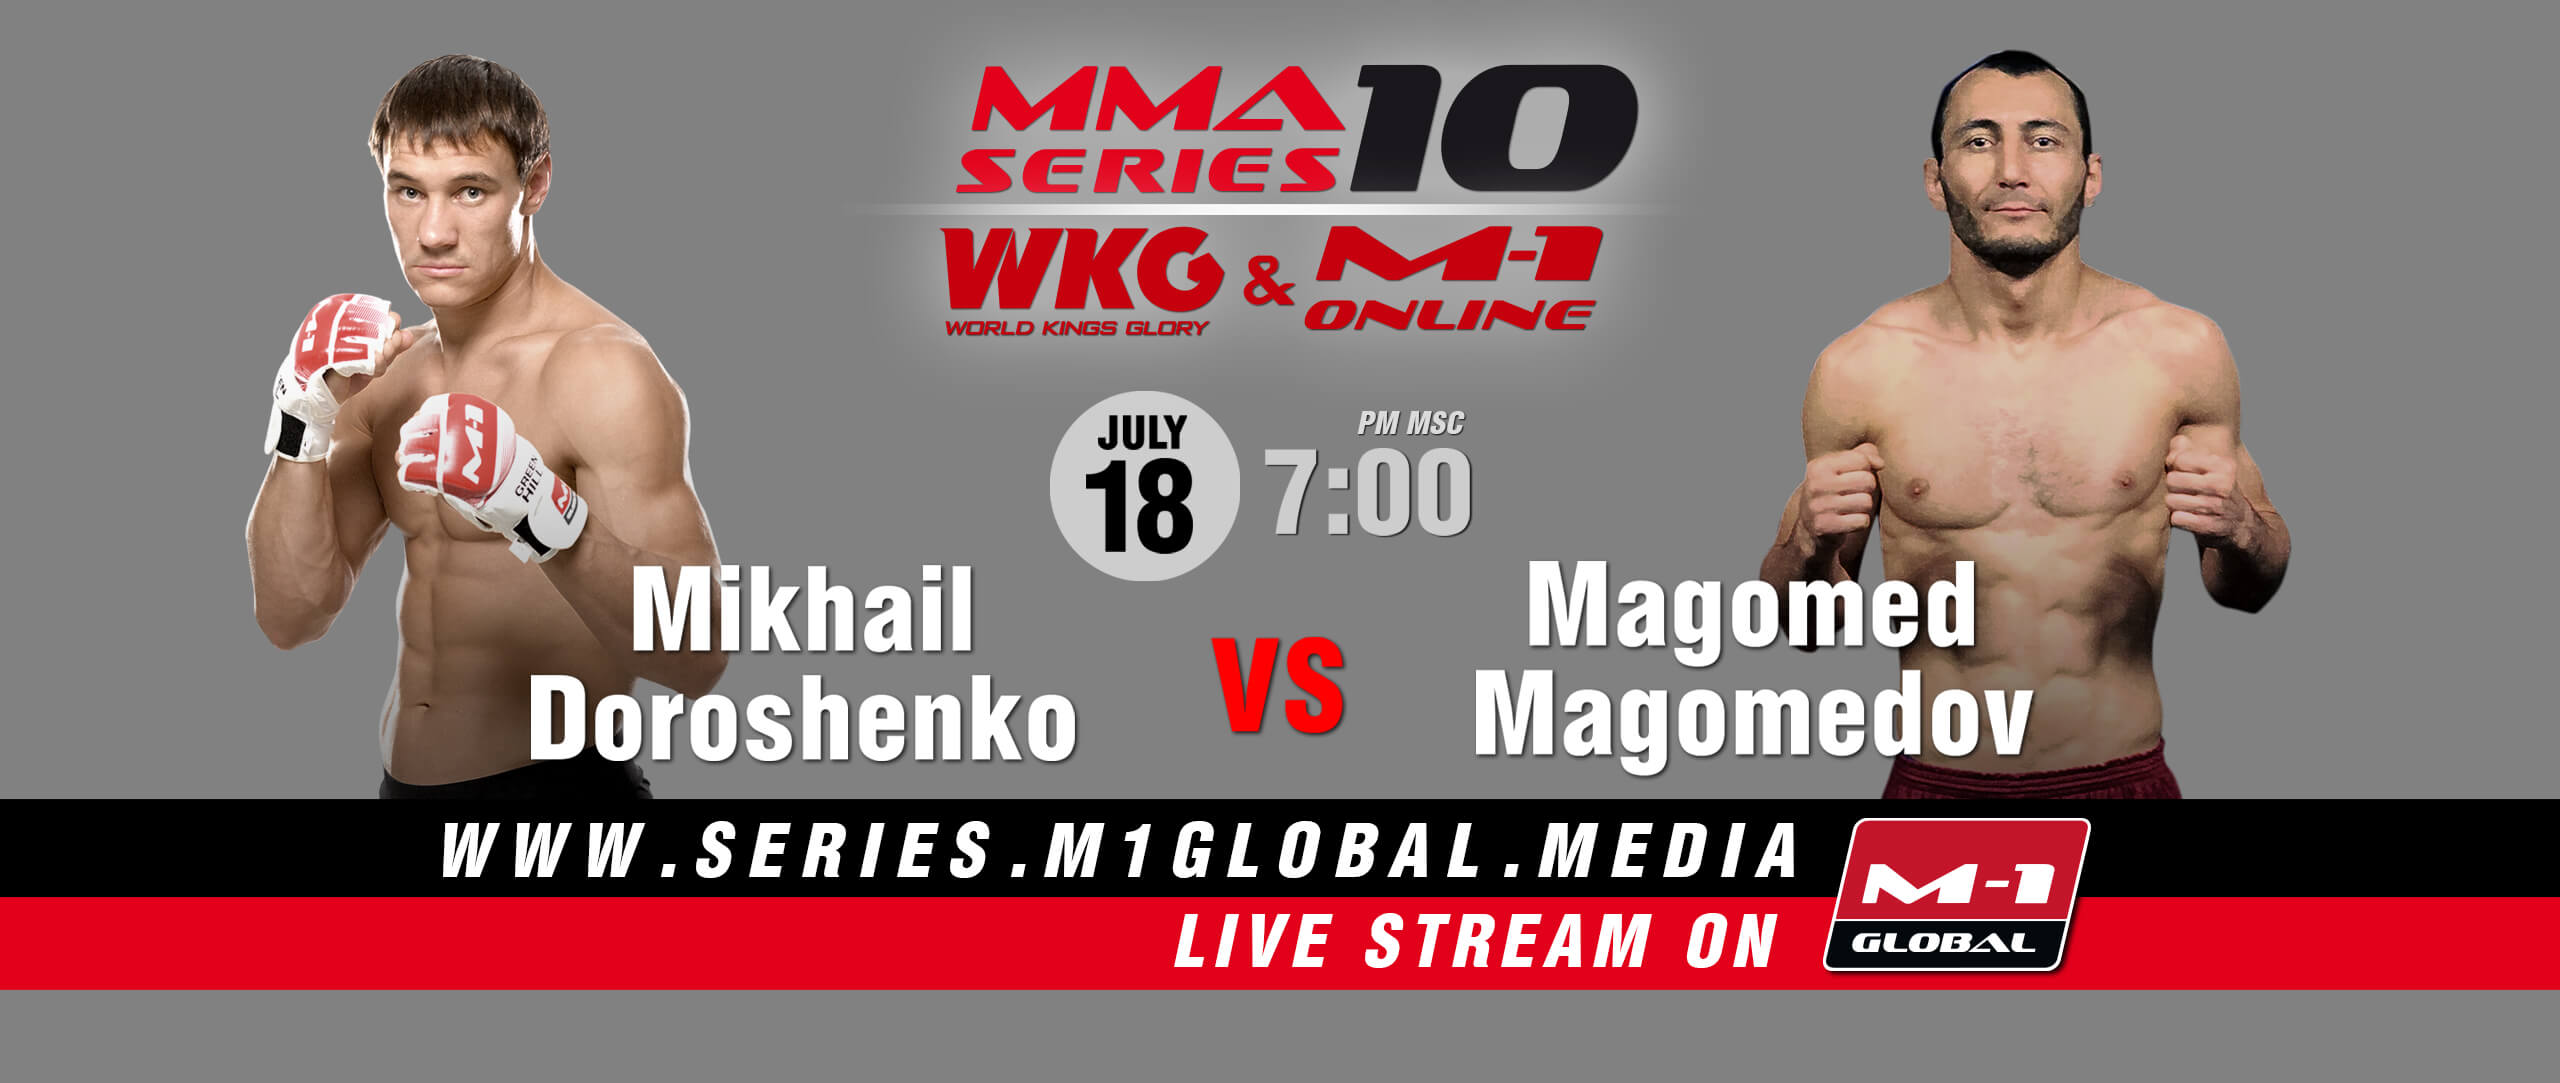 ММА Серия — 10 WKG and M-1 Online MMA Series official website